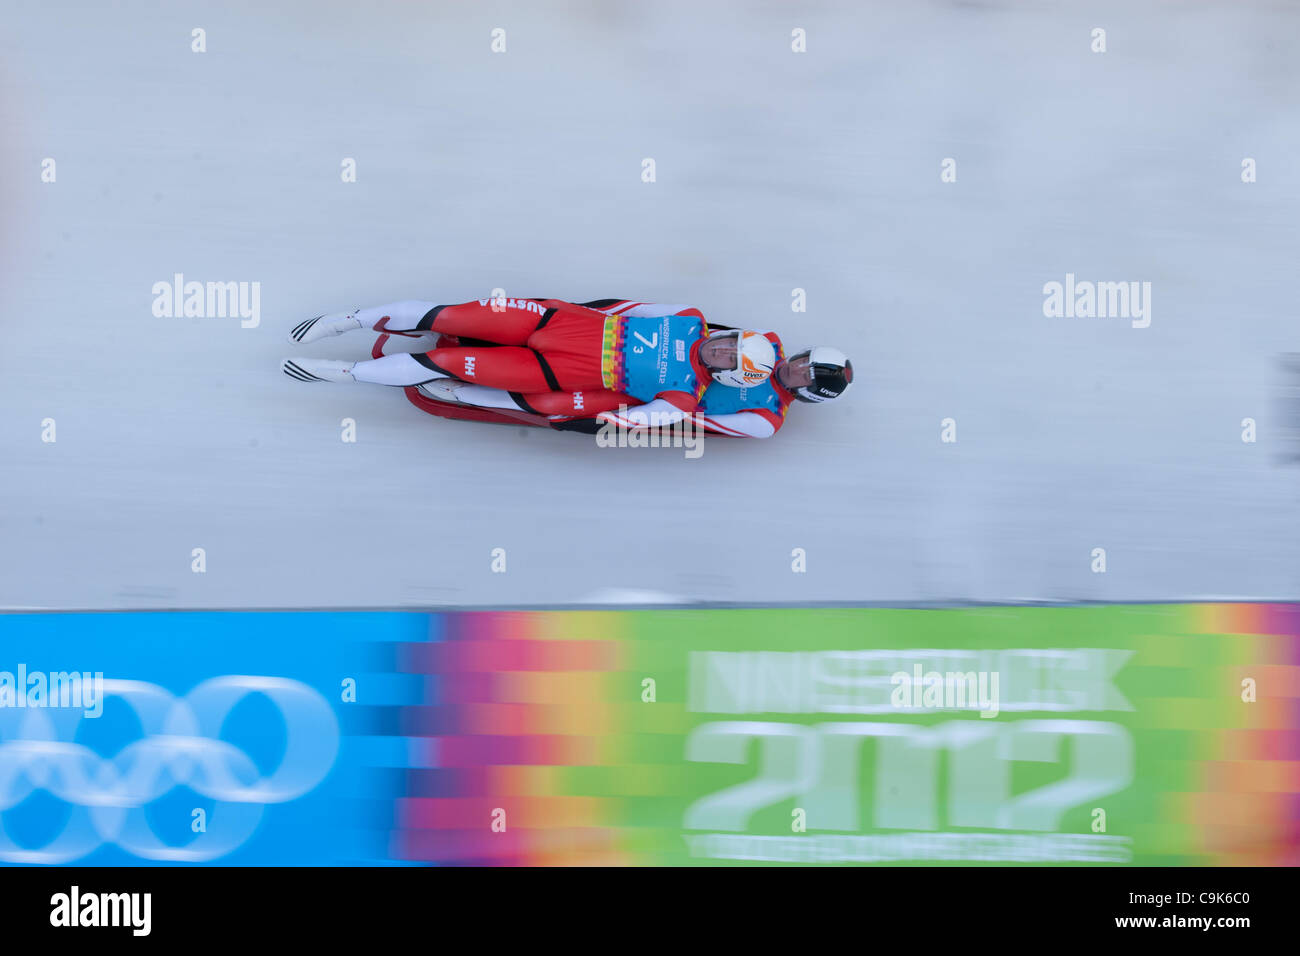 Jan. 17, 2012 - Innsbruck, Austria - Thomas Steu and Lorenz KOLLER from Austria race during Luge mixed team relay event at the Winter Youth Olympic Games (YOG) 2012..For the first time in Winter Olympics the program integrates mixed gender team events. (Credit Image: © Marcello Farina/Southcreek/ZUM Stock Photo